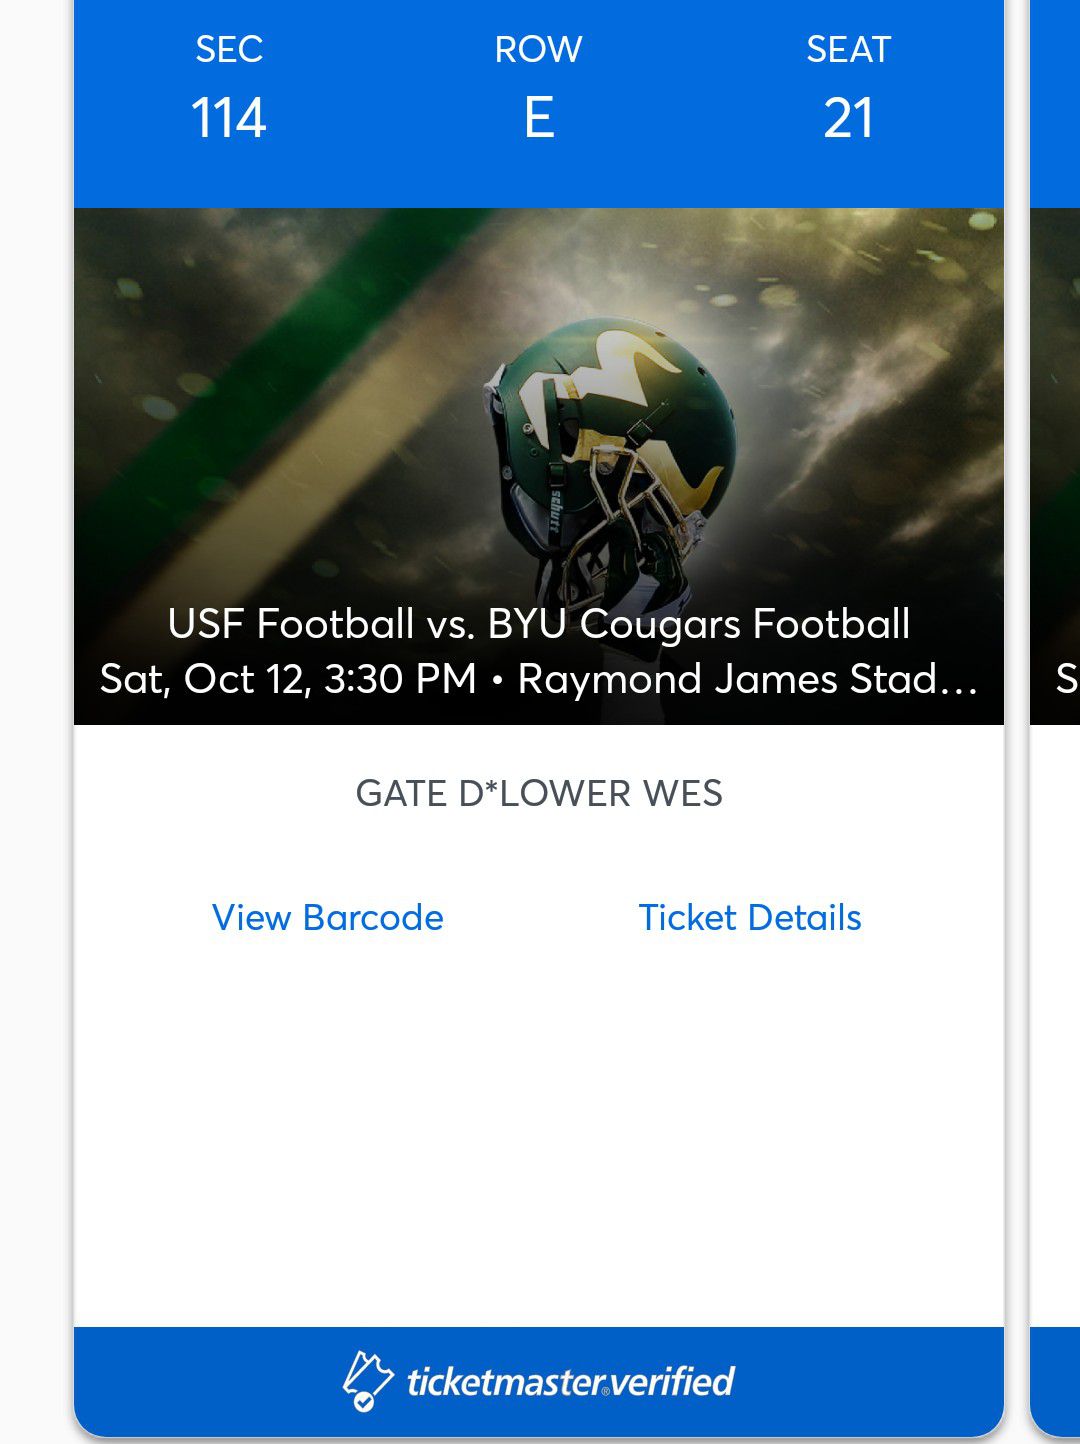 Four (4) USF vs. BYU football game tickets